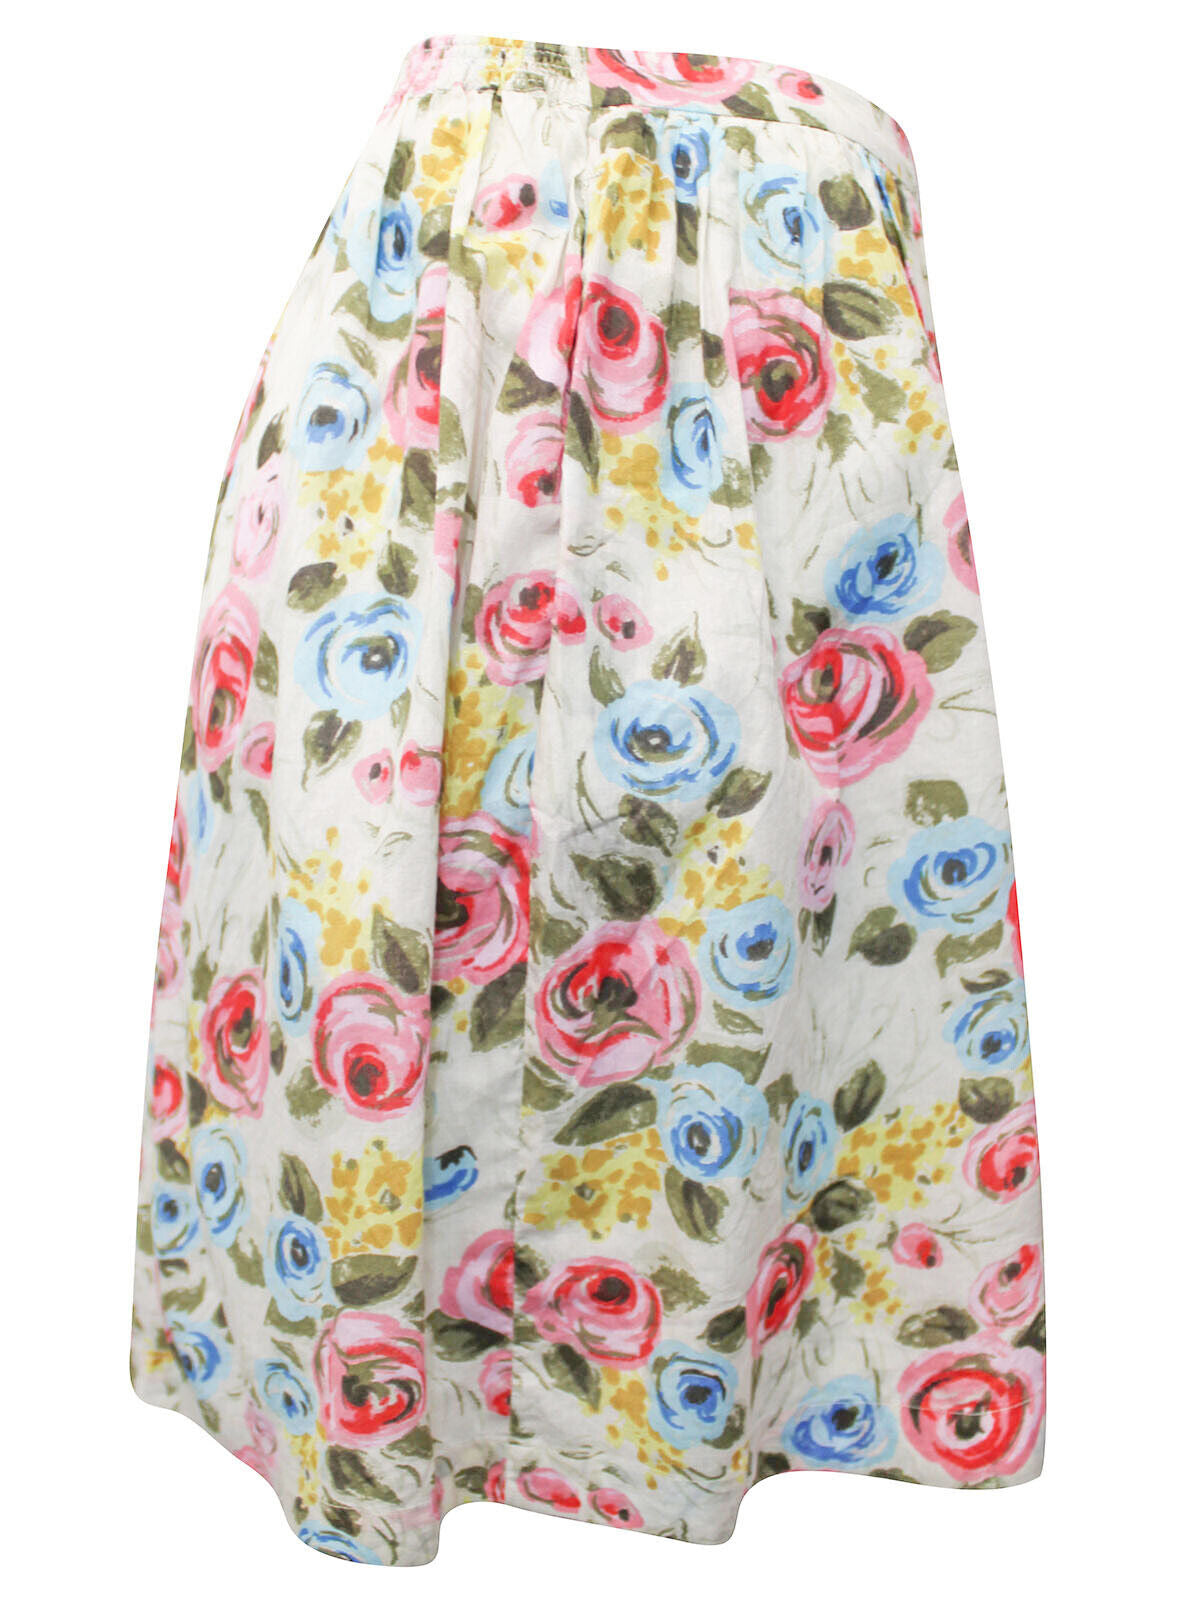 EX Cath Kidston Floral Multicolour Roses Button Front Summer Short A-Line Skirt